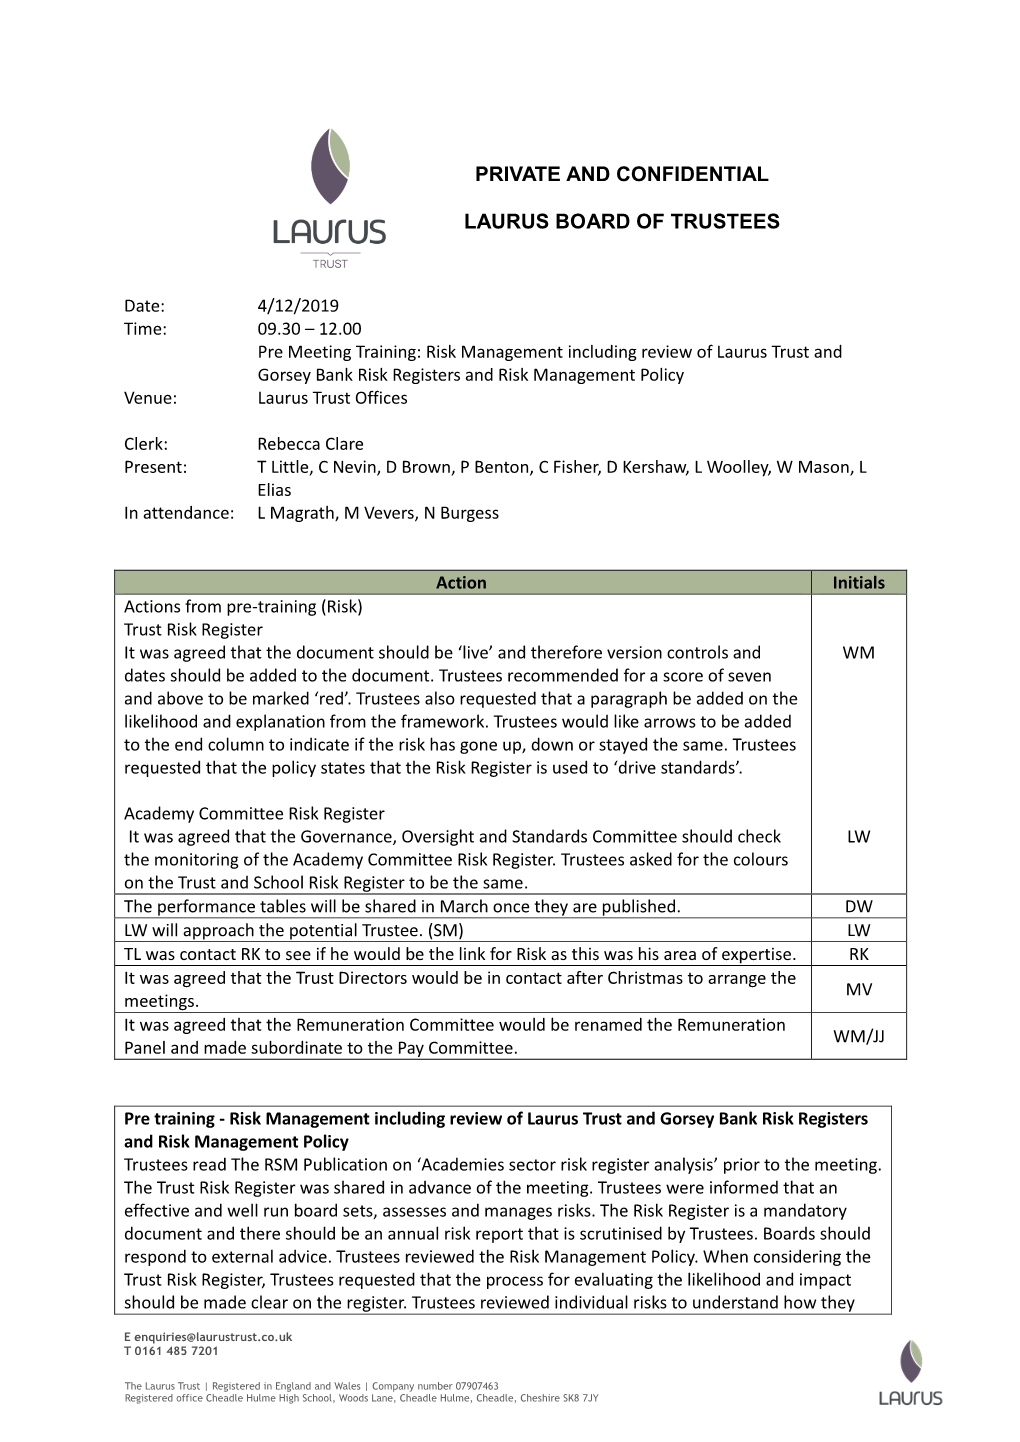 Private and Confidential Laurus Board of Trustees